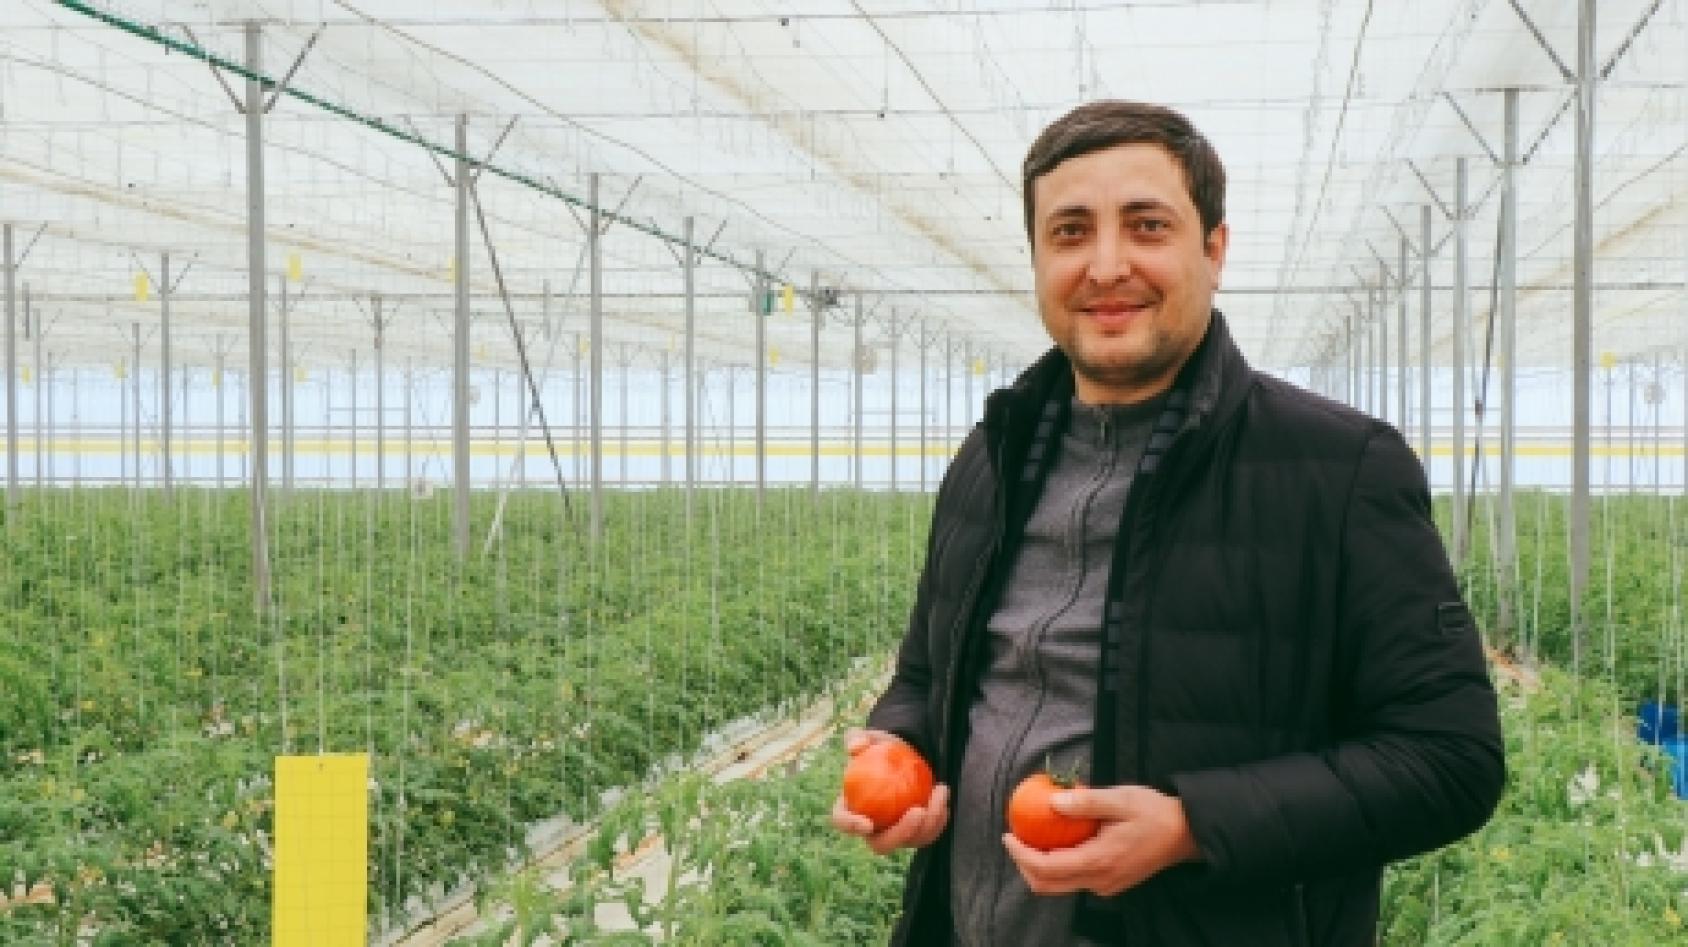 A man inside a greenhouse,  holding two tomatoes.